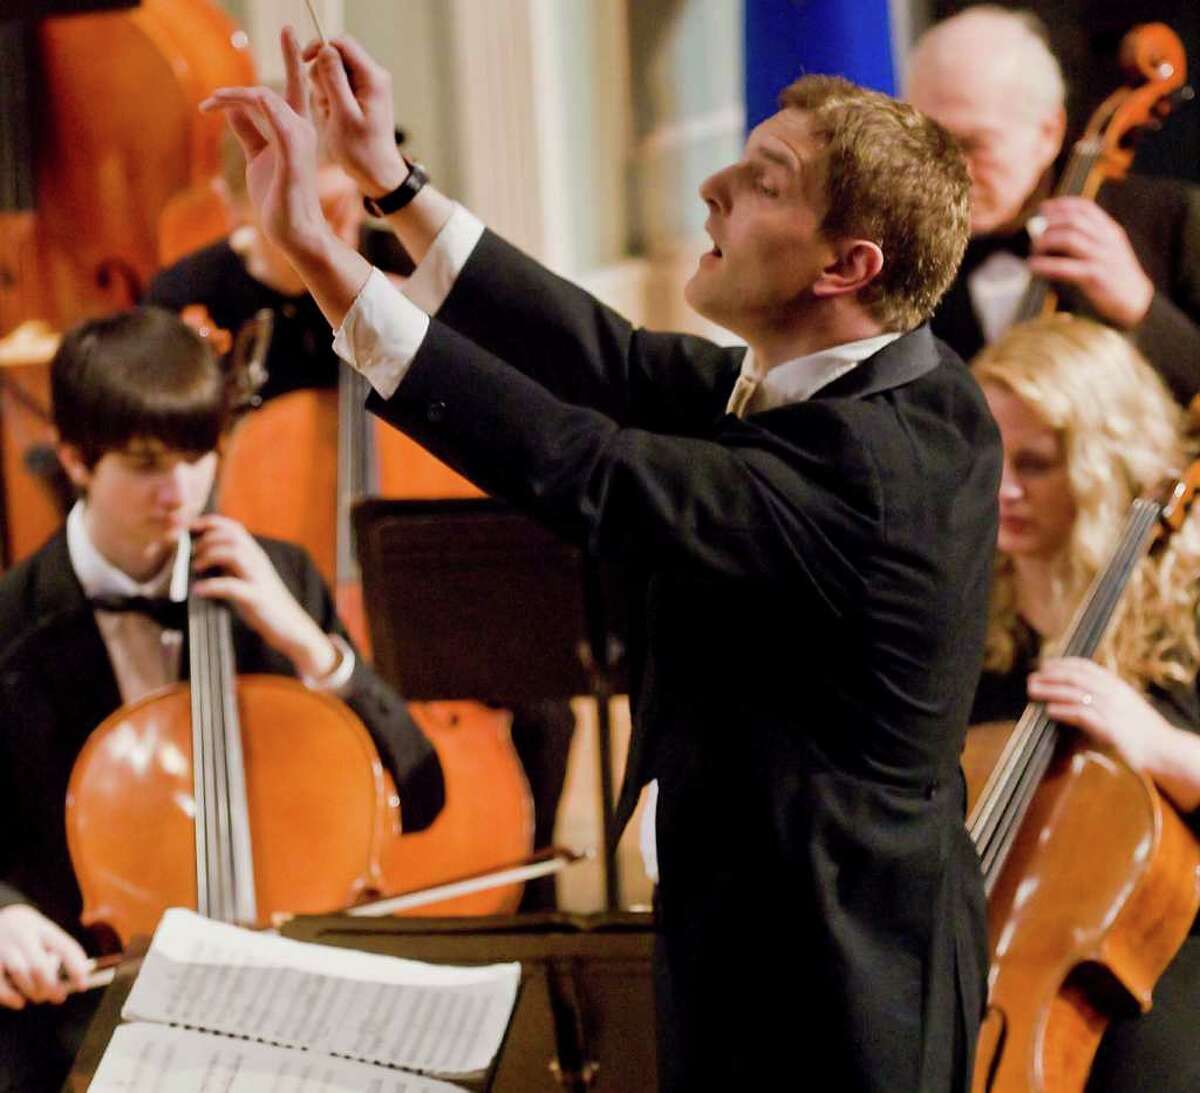 Ariel Rudiakov conducts the Danbury Symphony, which is among several groups that will perform in a special concert March 13 to celebrate the 75th anniversary of The Danbury Music Centre.